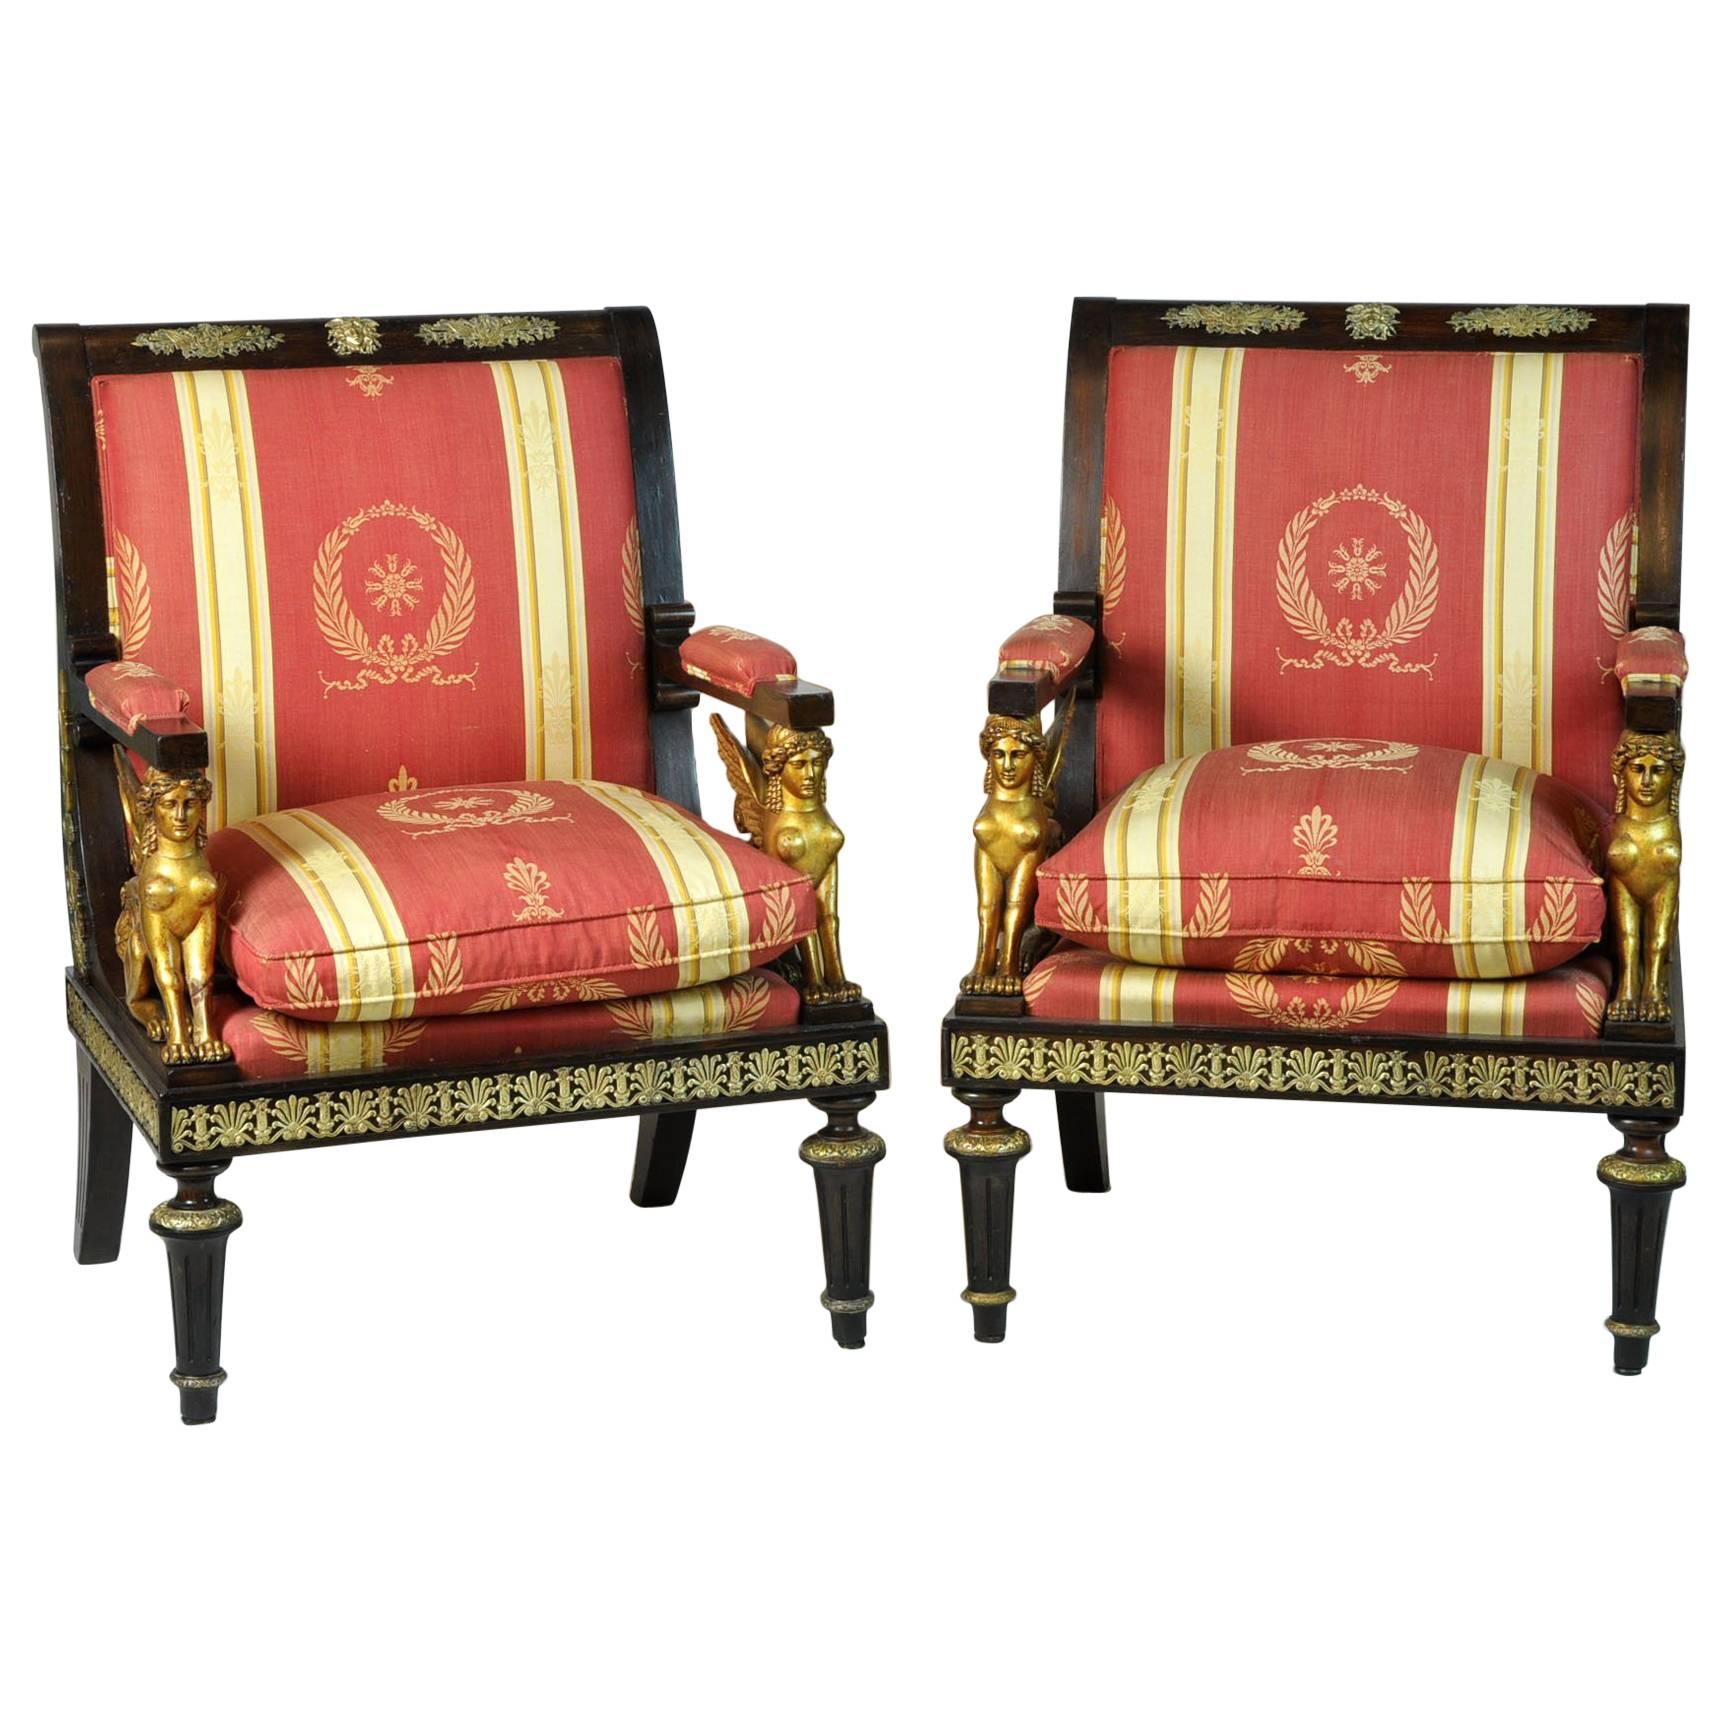 Pair of French Empire Revival Bronze Mounted and Gilt Sphinx Armchairs